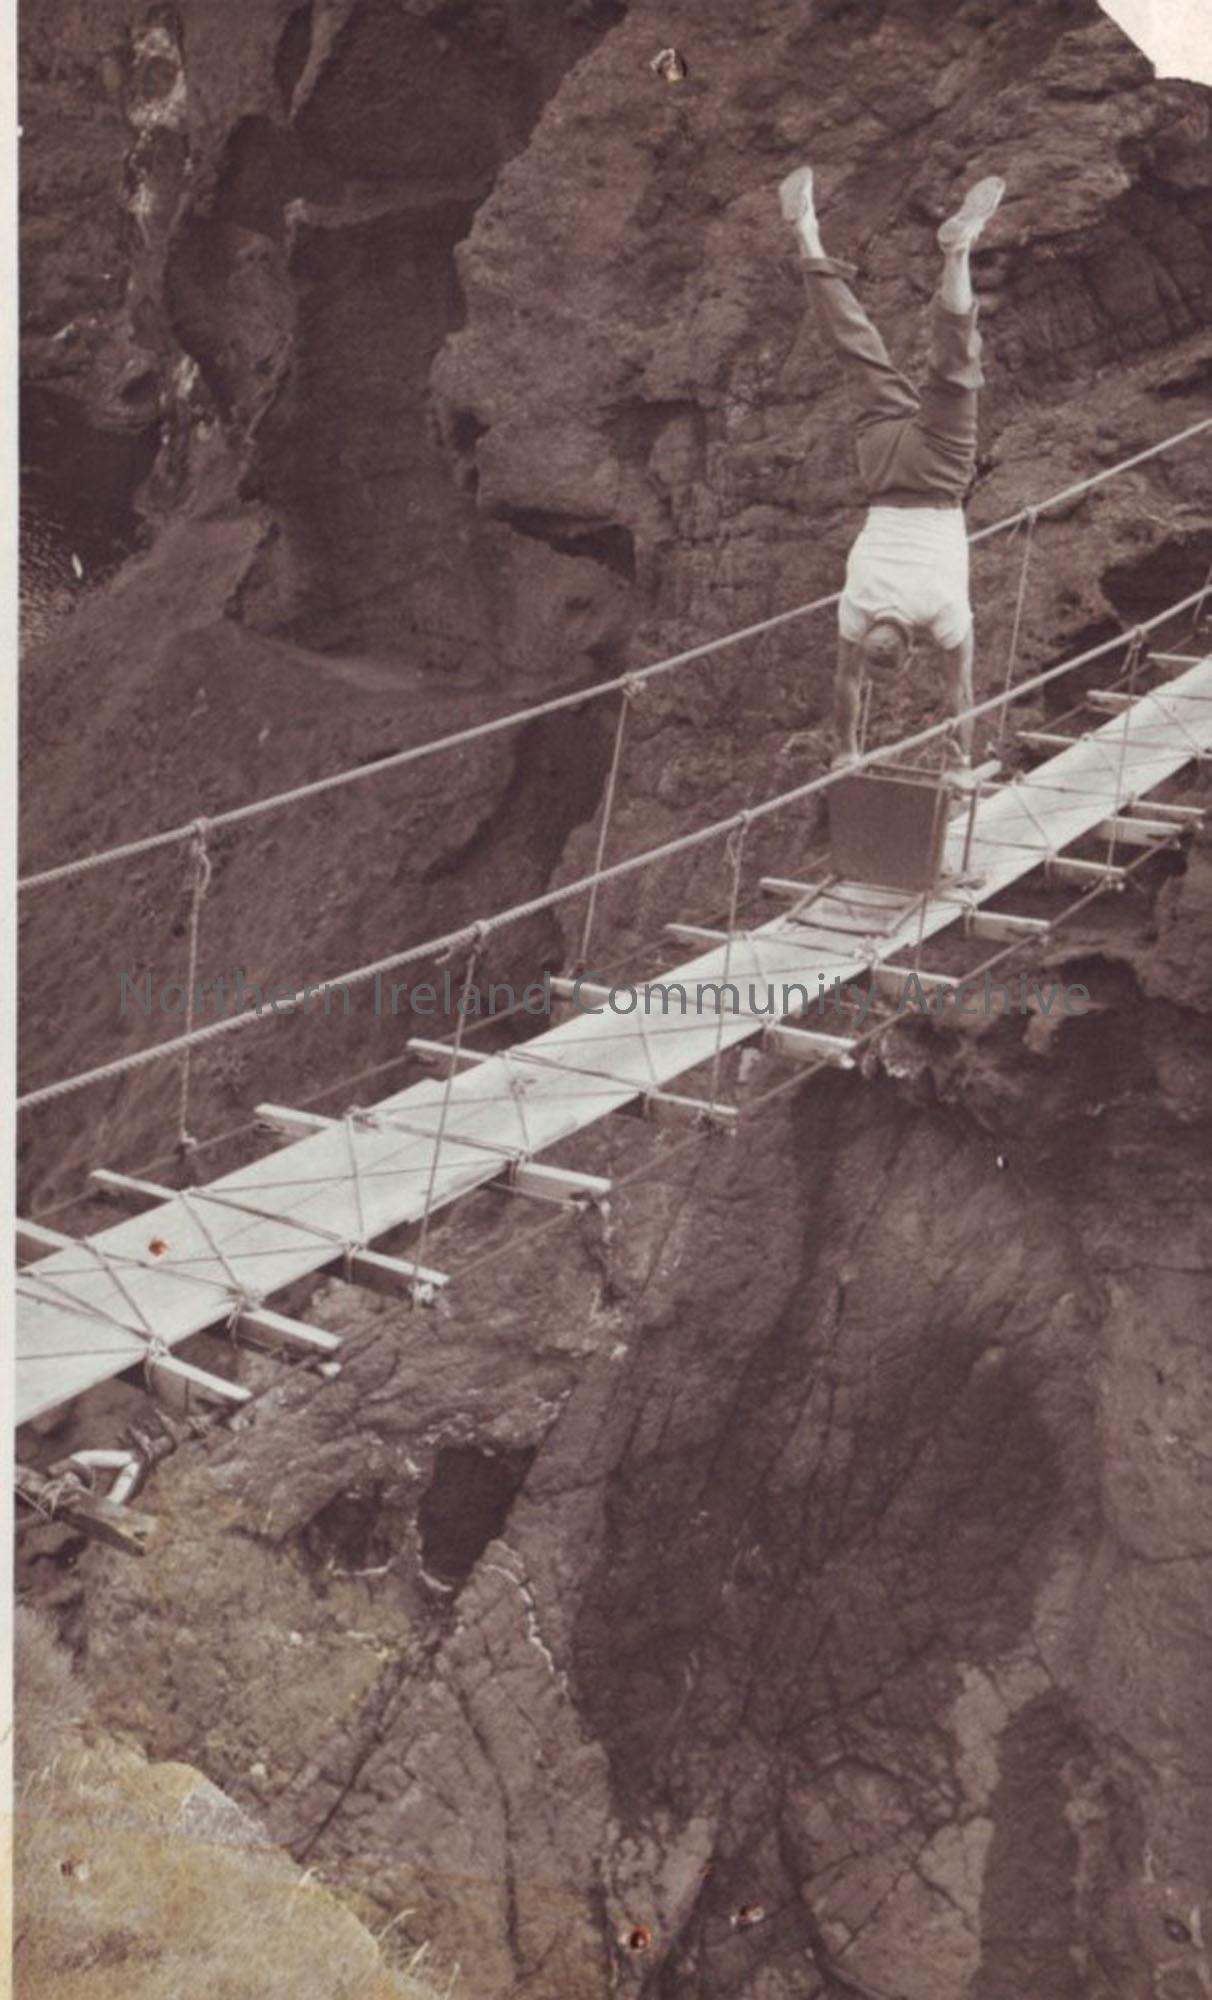 Leslie McCurdy, Athlete balancing on a chair on Carrick-a-Rede rope-bridge